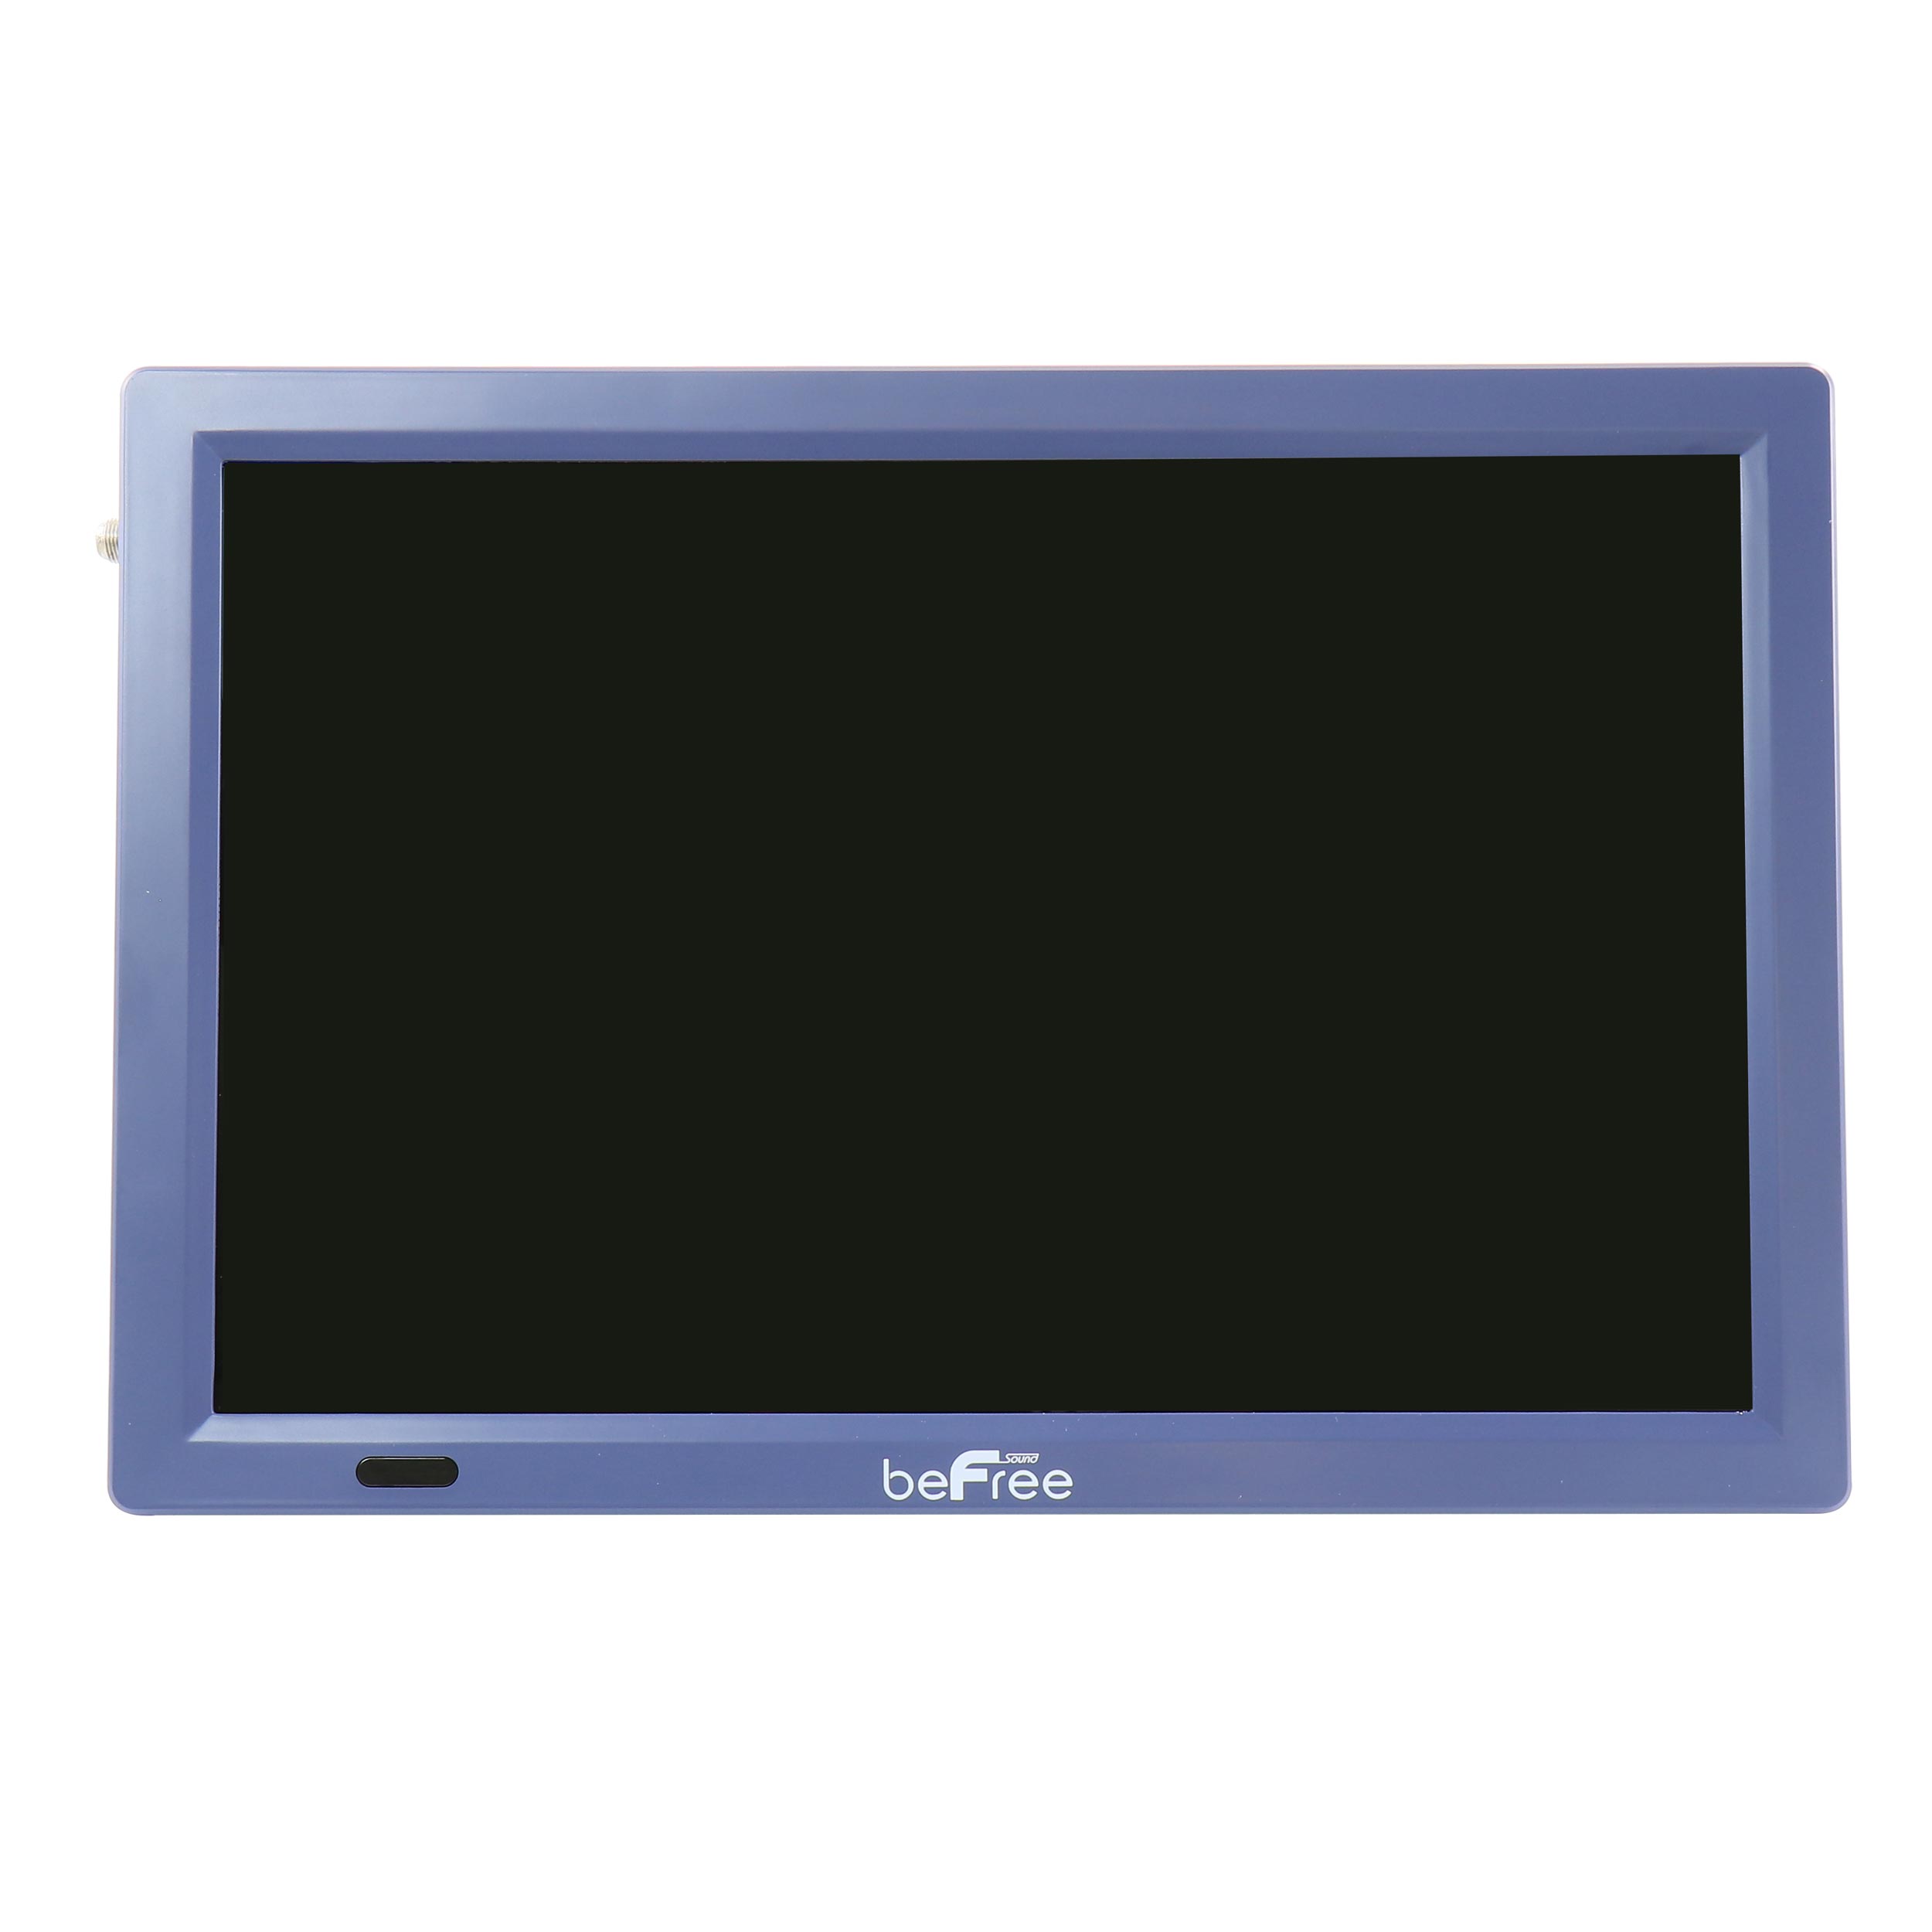 beFree Sound Portable Rechargeable 14 Inch LED TV with HDMI, SD/MMC, USB, VGA, AV In/Out and Built-in Digital Tuner in Blue